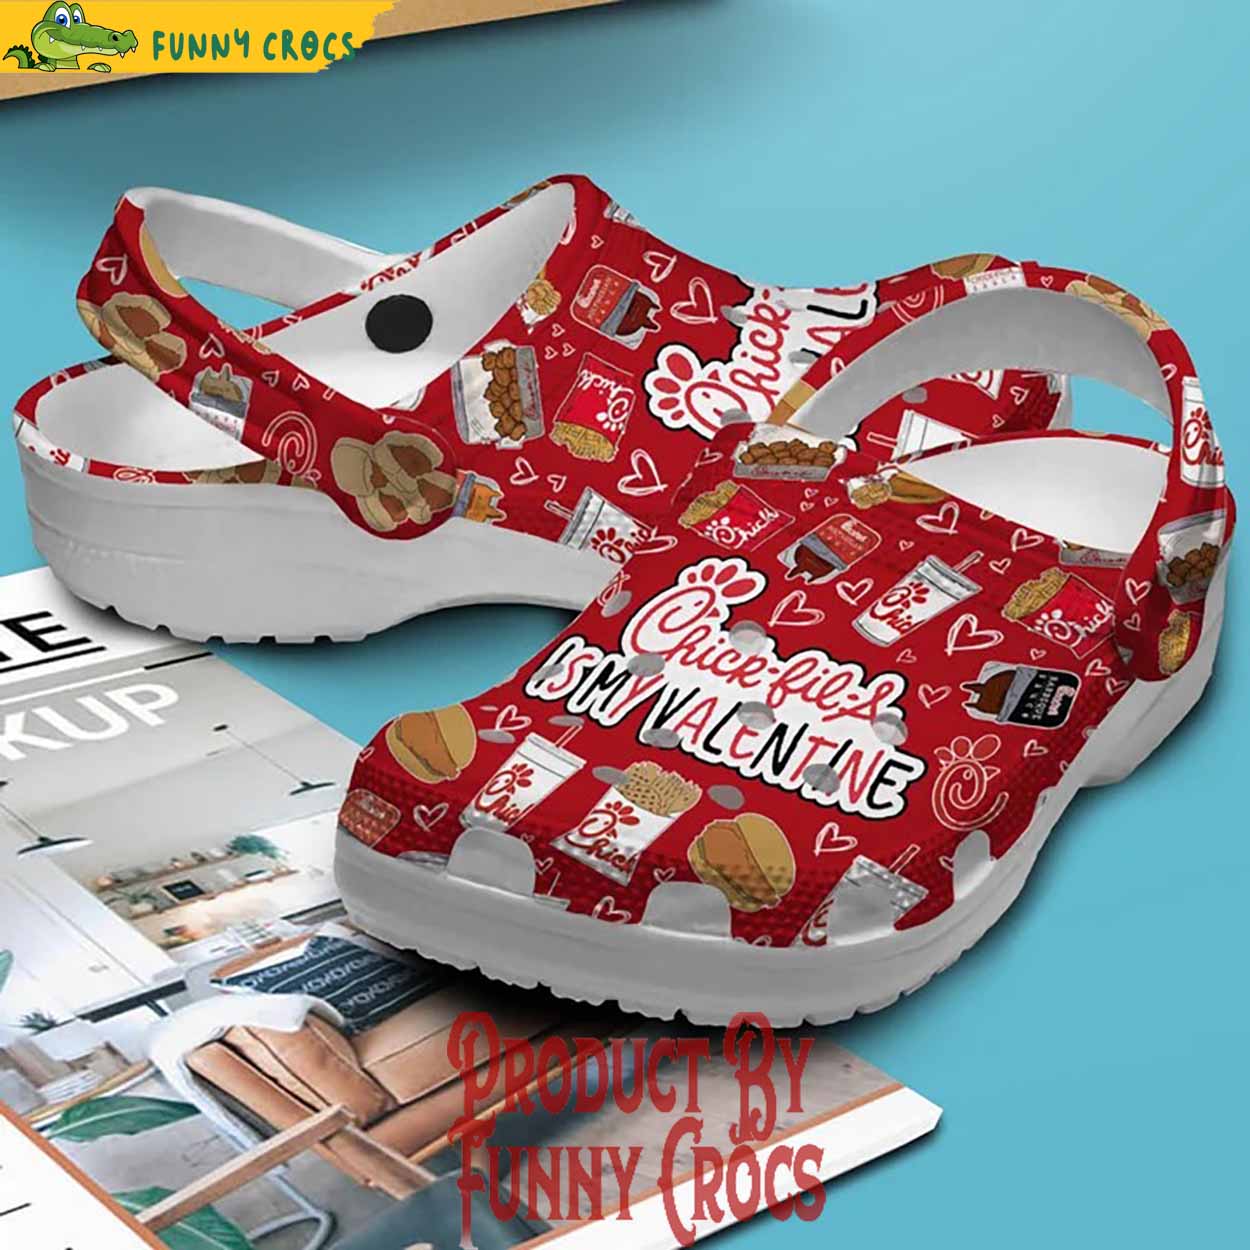 Chick Fil A Is My Valentines Crocs Shoes